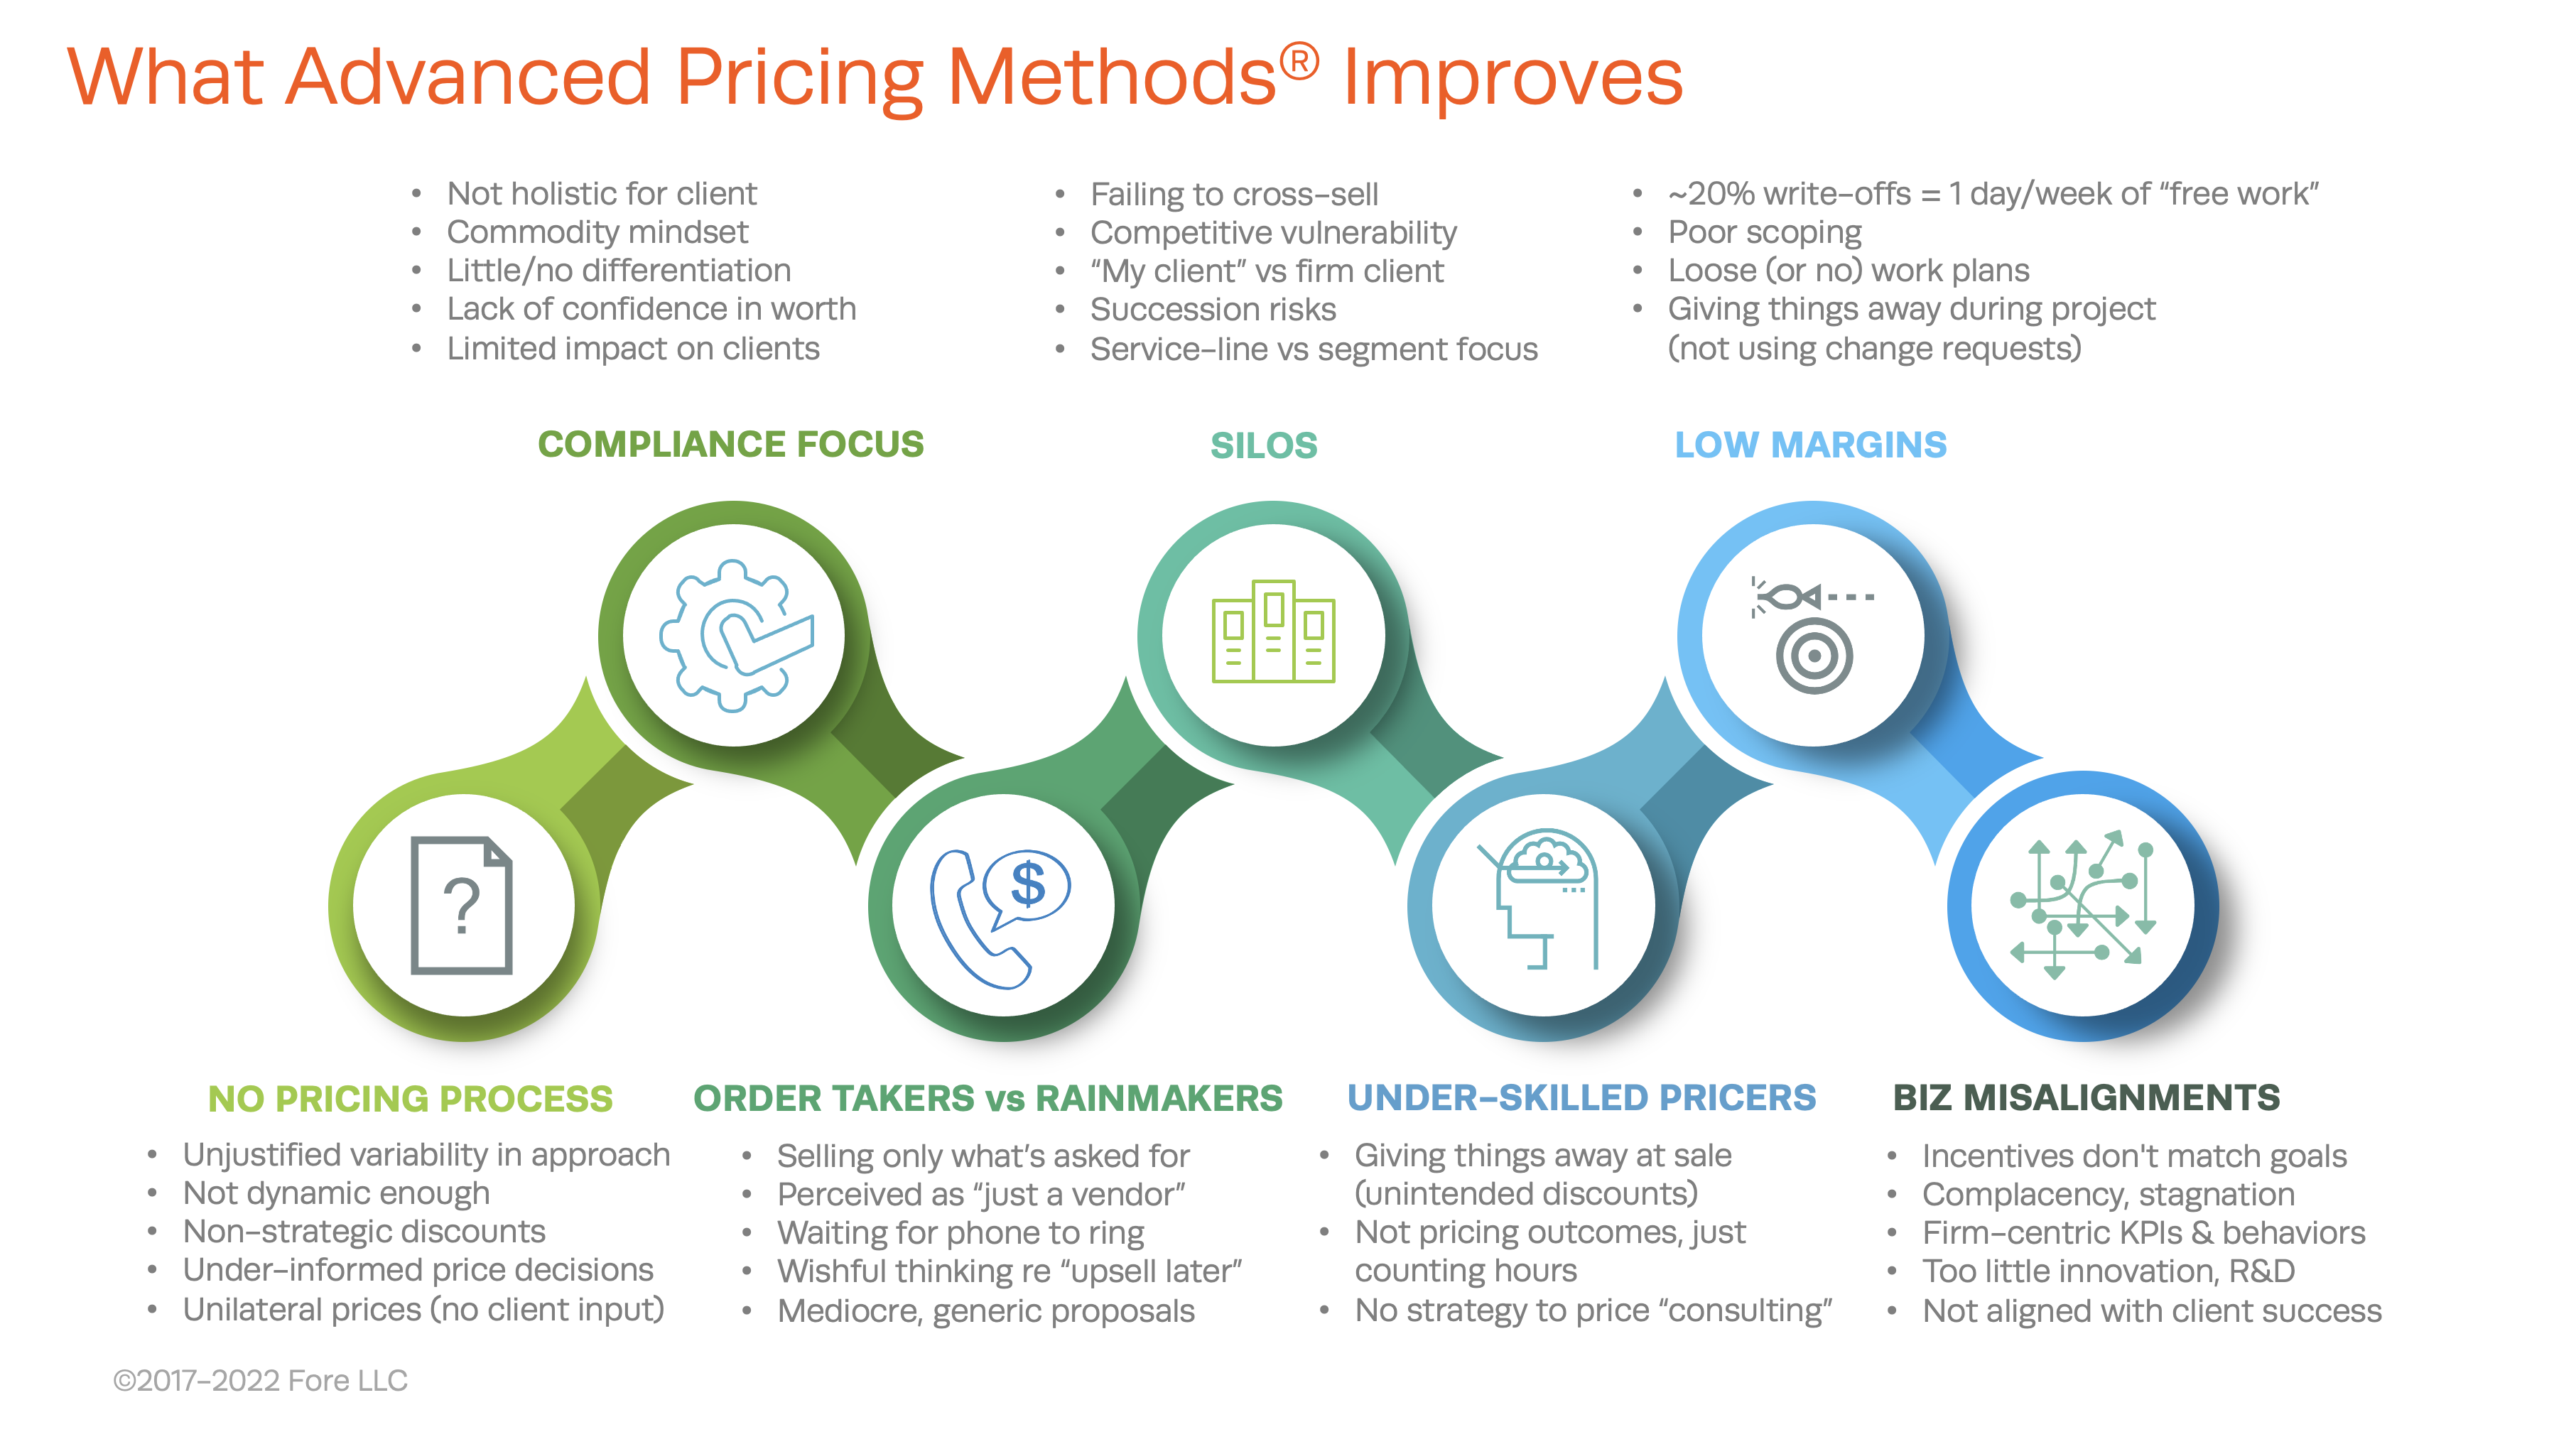 What Does Advanced Pricing Methods Improve?